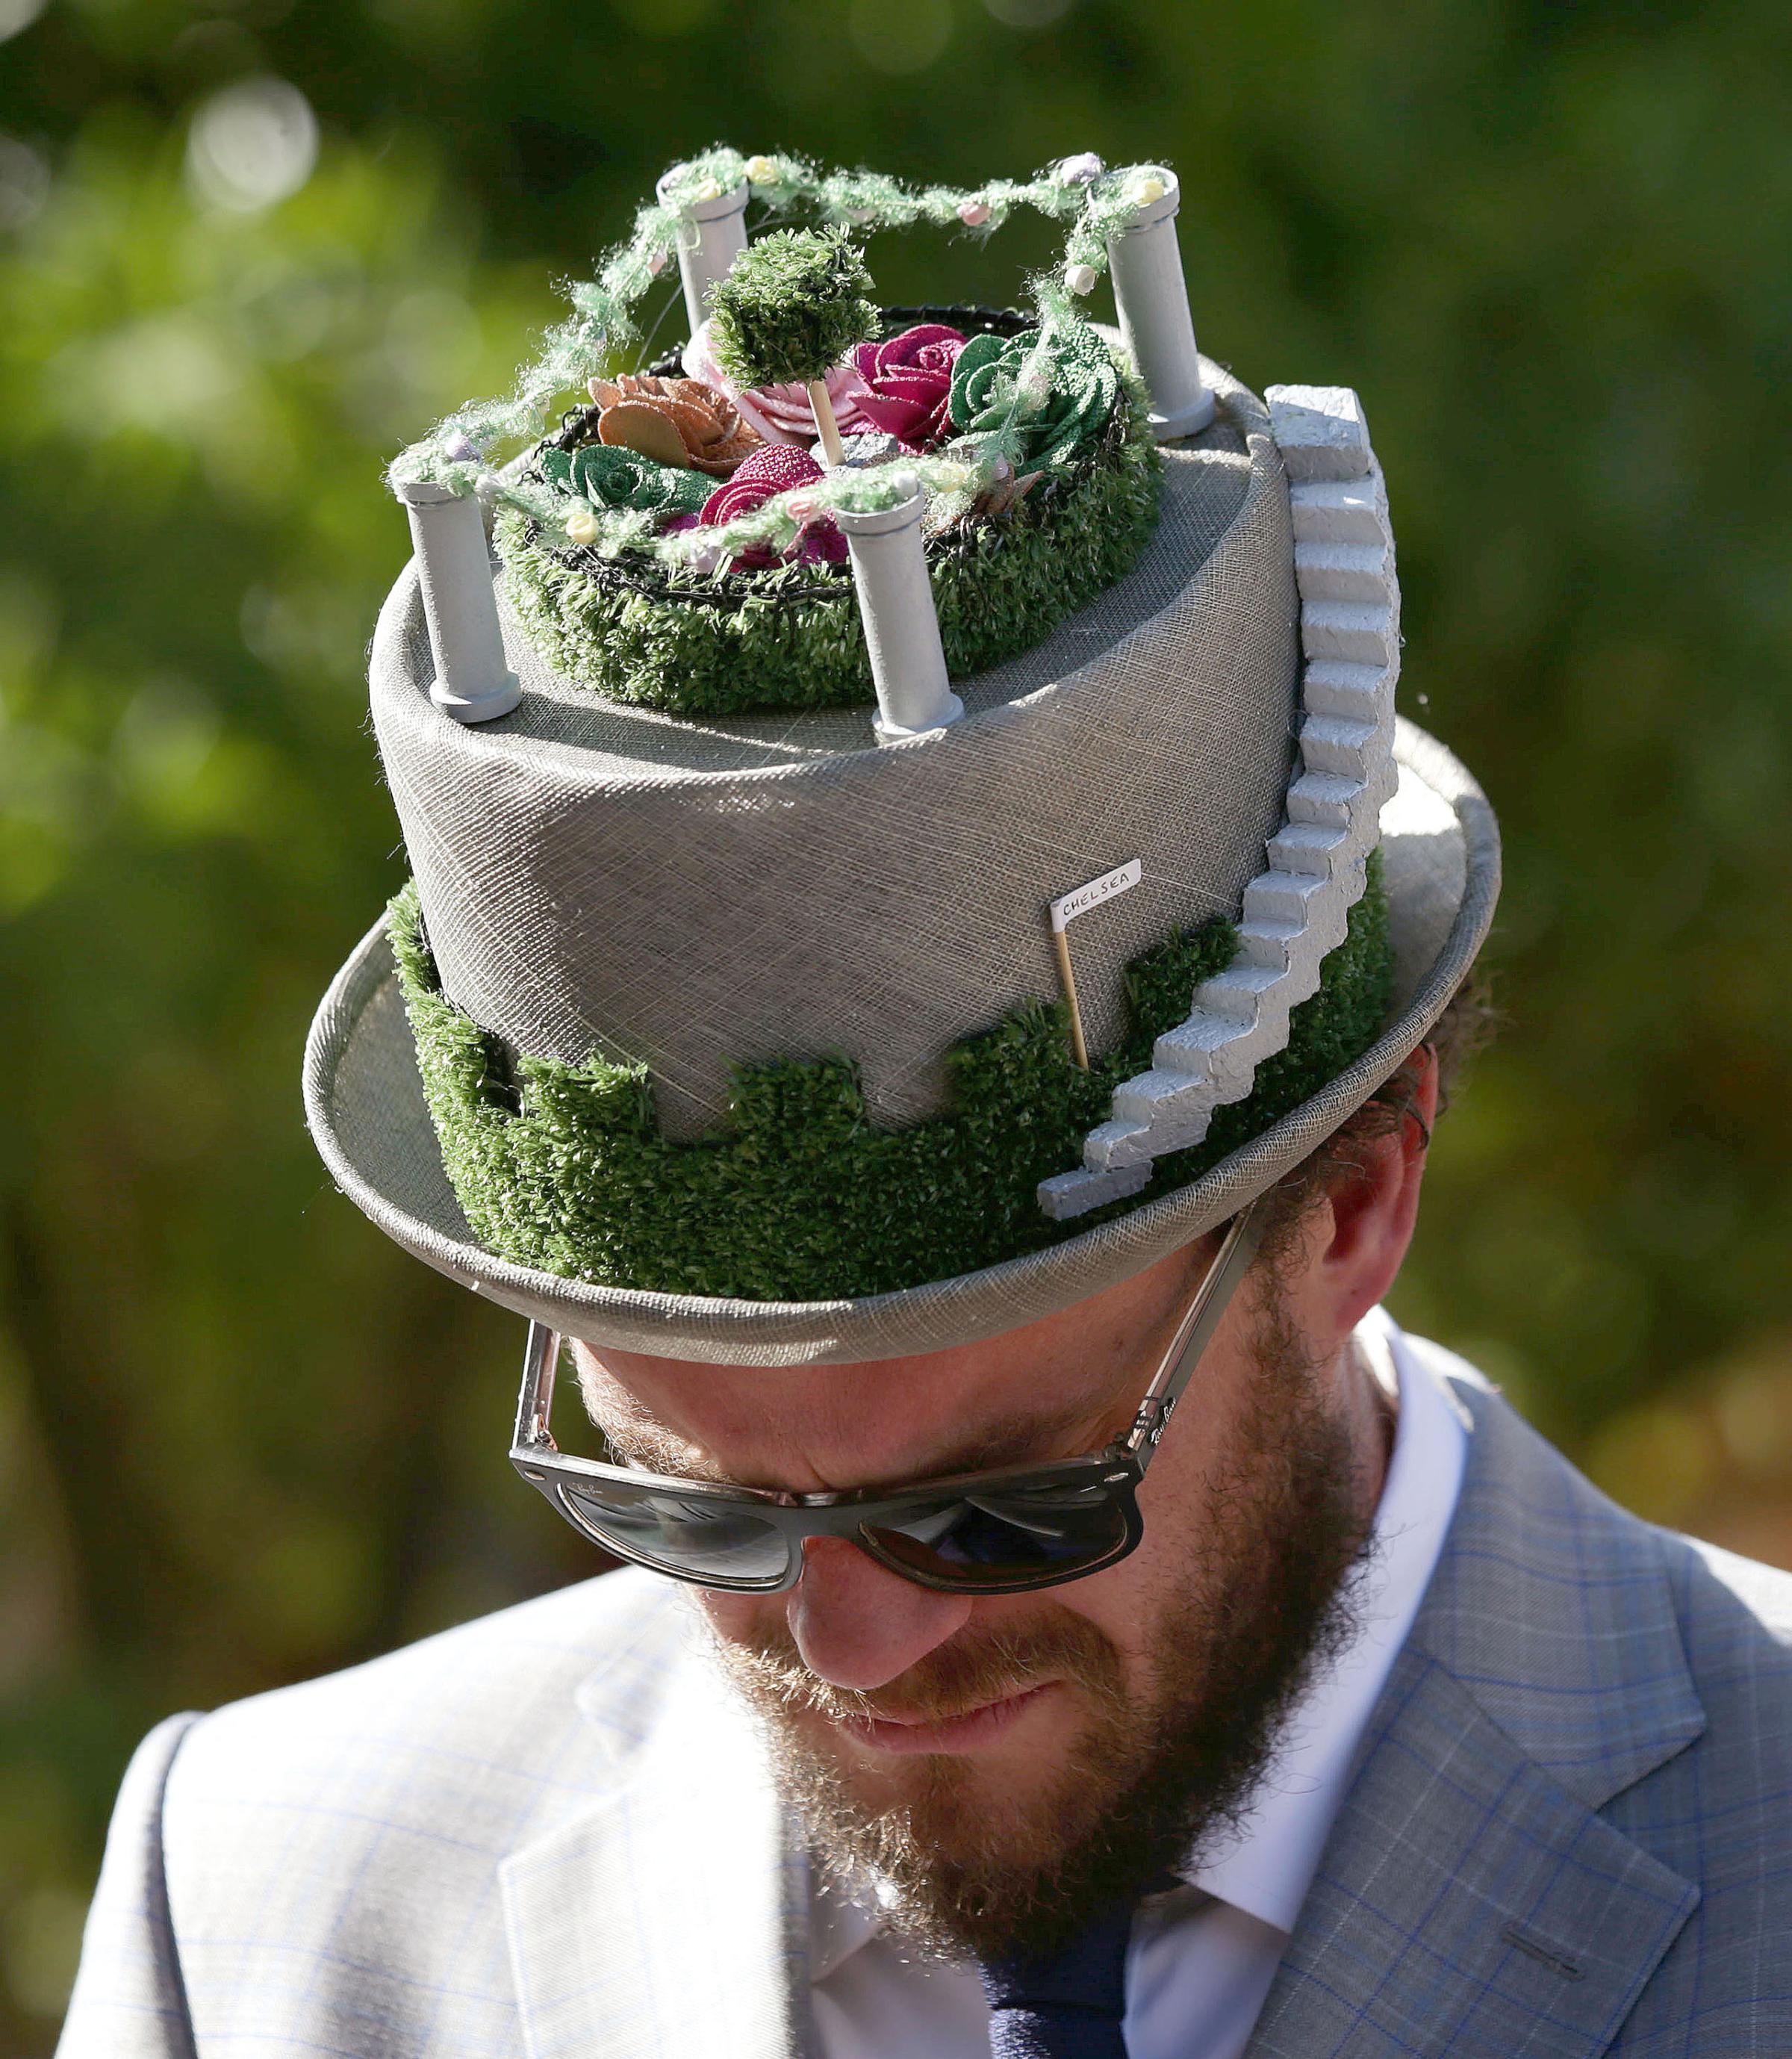 Visitor Michael Conway wears a floral hat during a press day ahead of the Chelsea Flower Show at the Royal Hospital Chelsea in London, May 23, 2016.